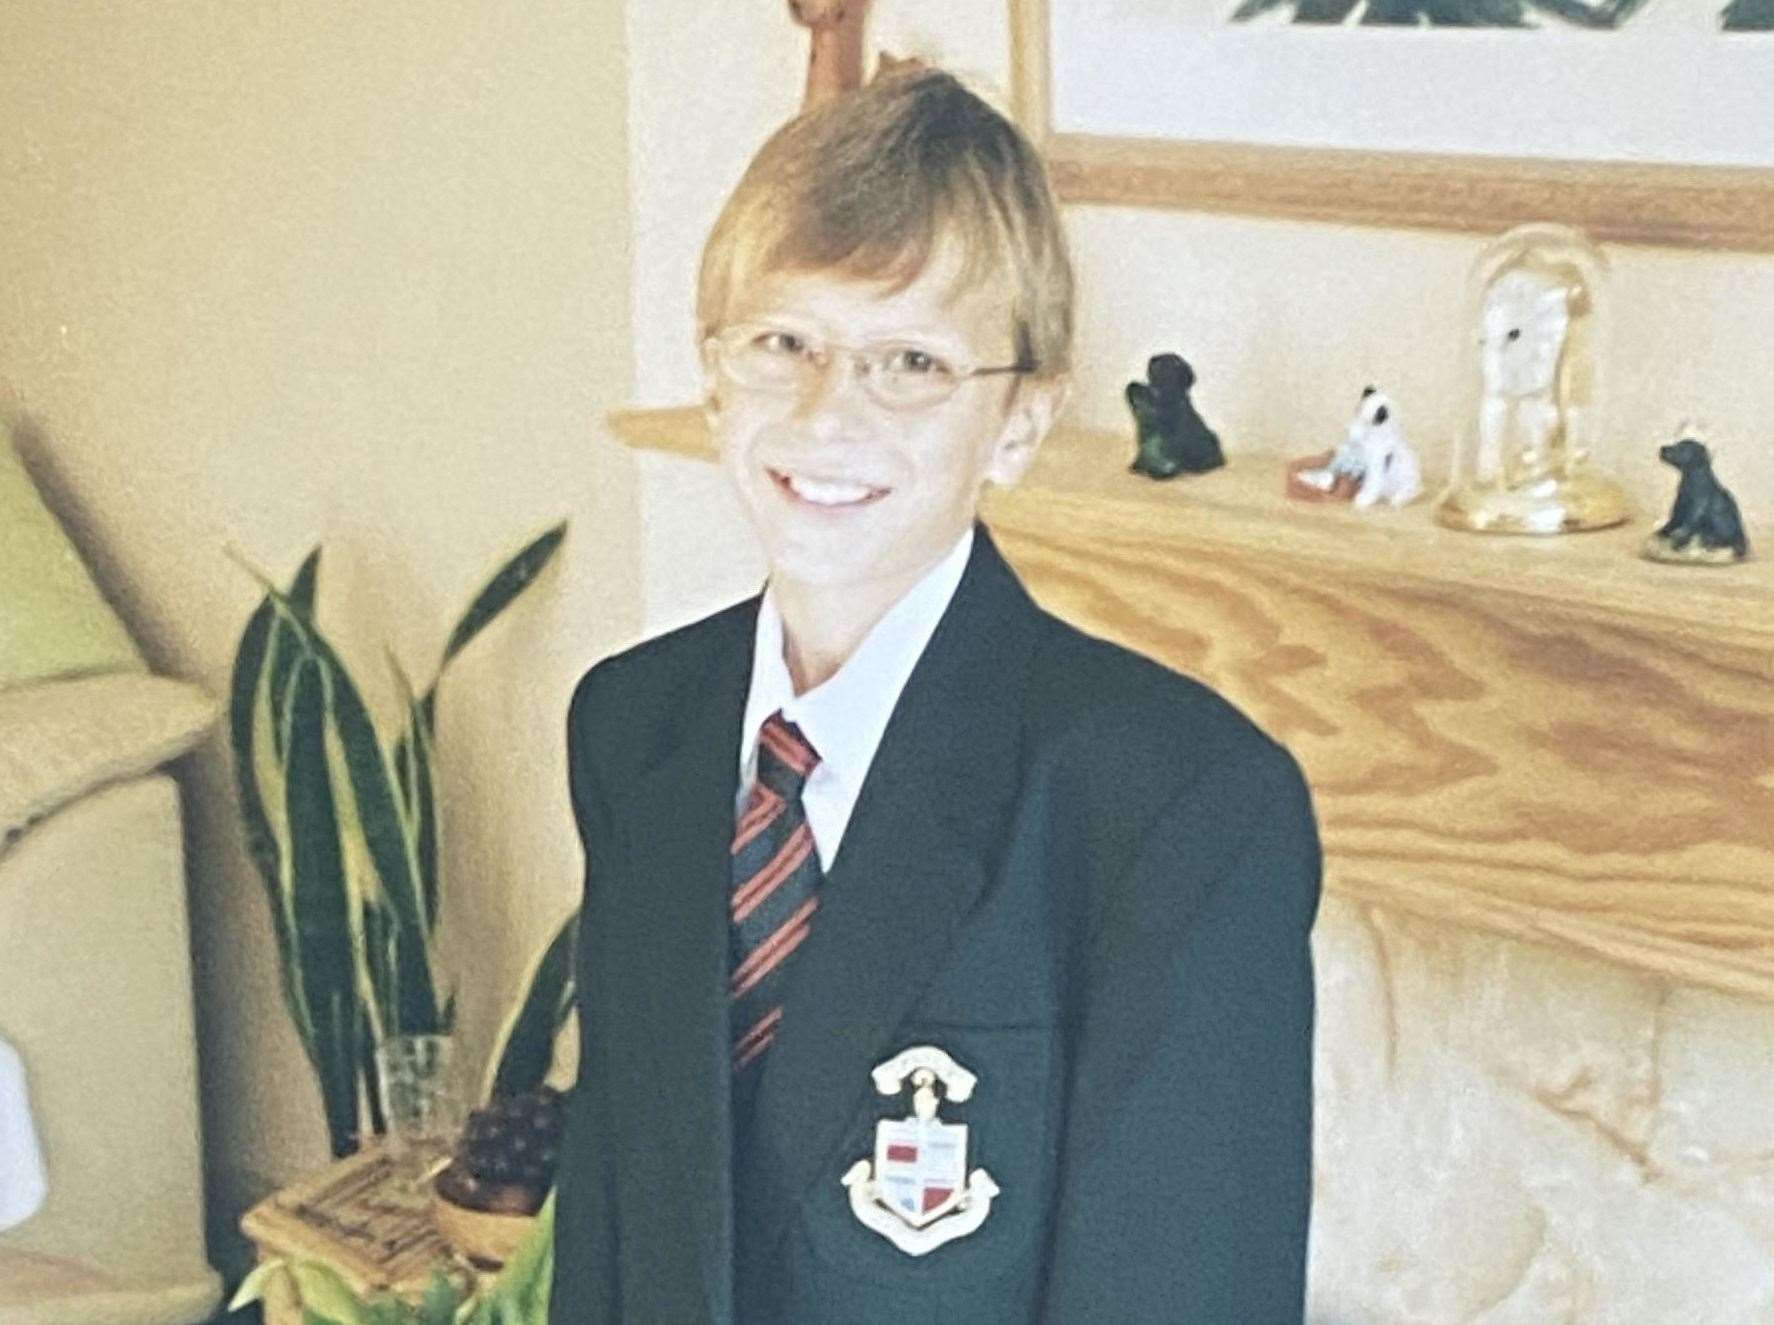 James on his first day at the Harvey Grammar